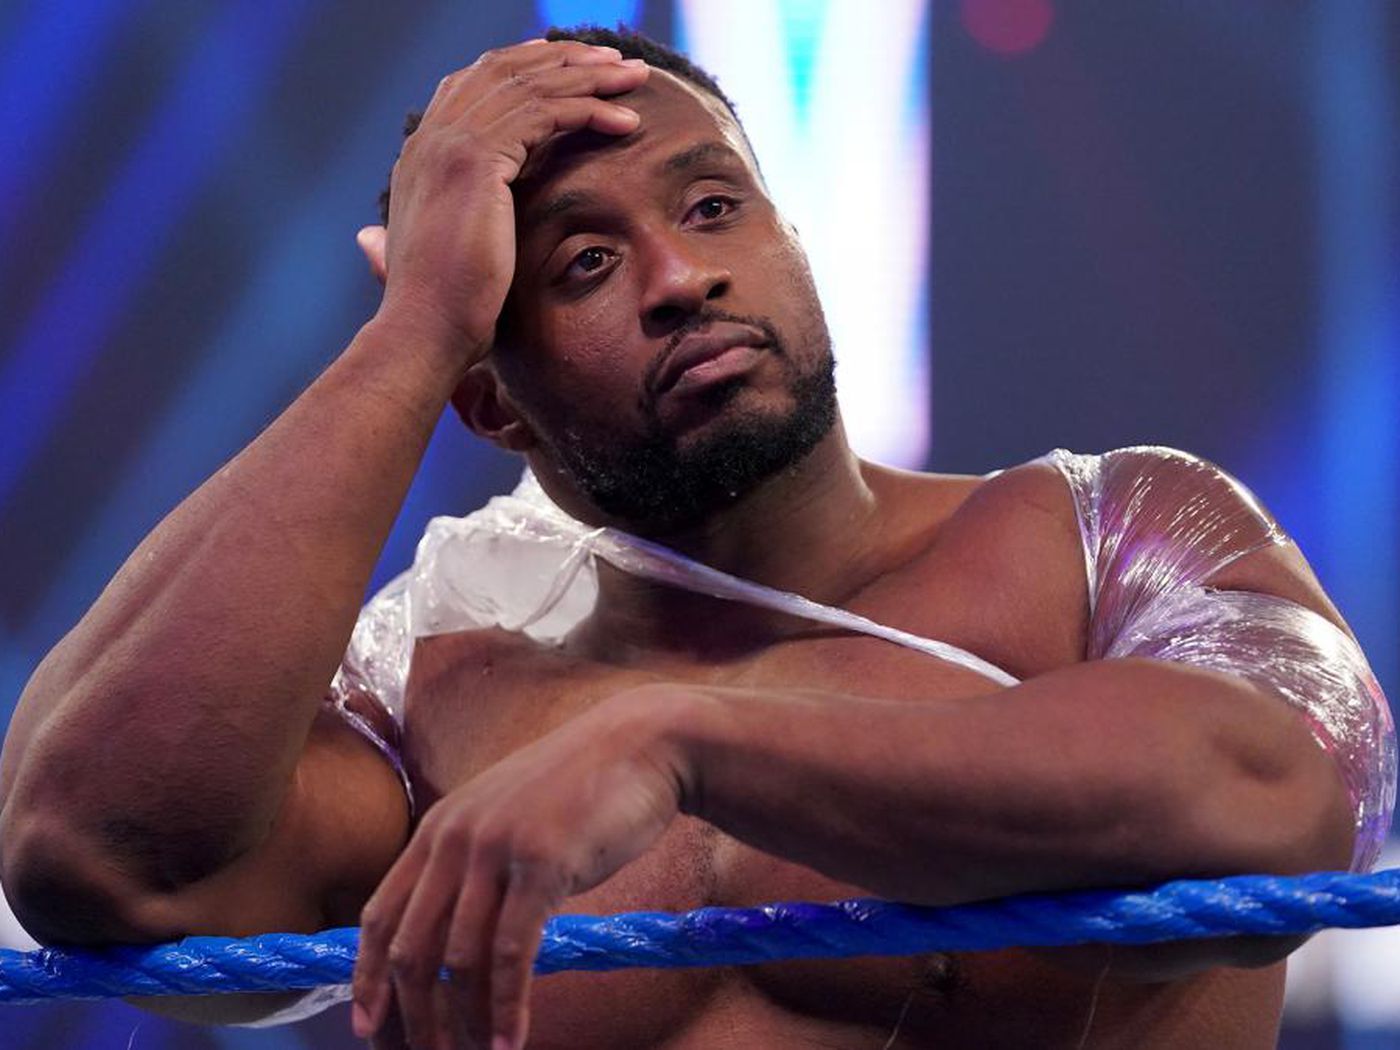 Here's why Big E won't win the 2021 Royal Rumble match